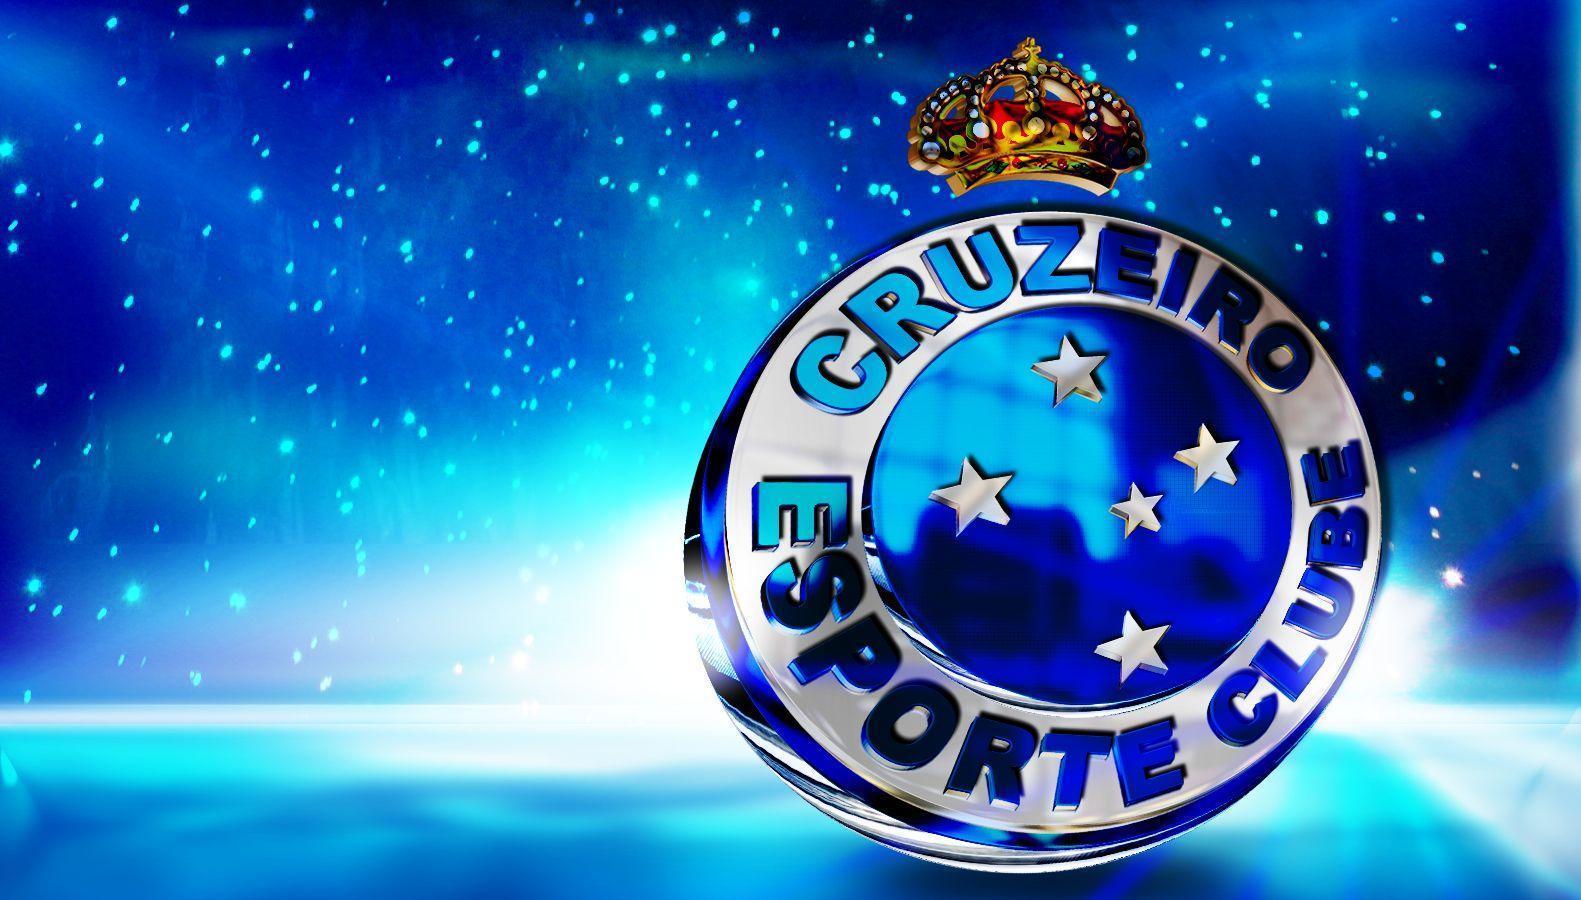 TOP TRENDS. Suggestions. Image for Cruzeiro